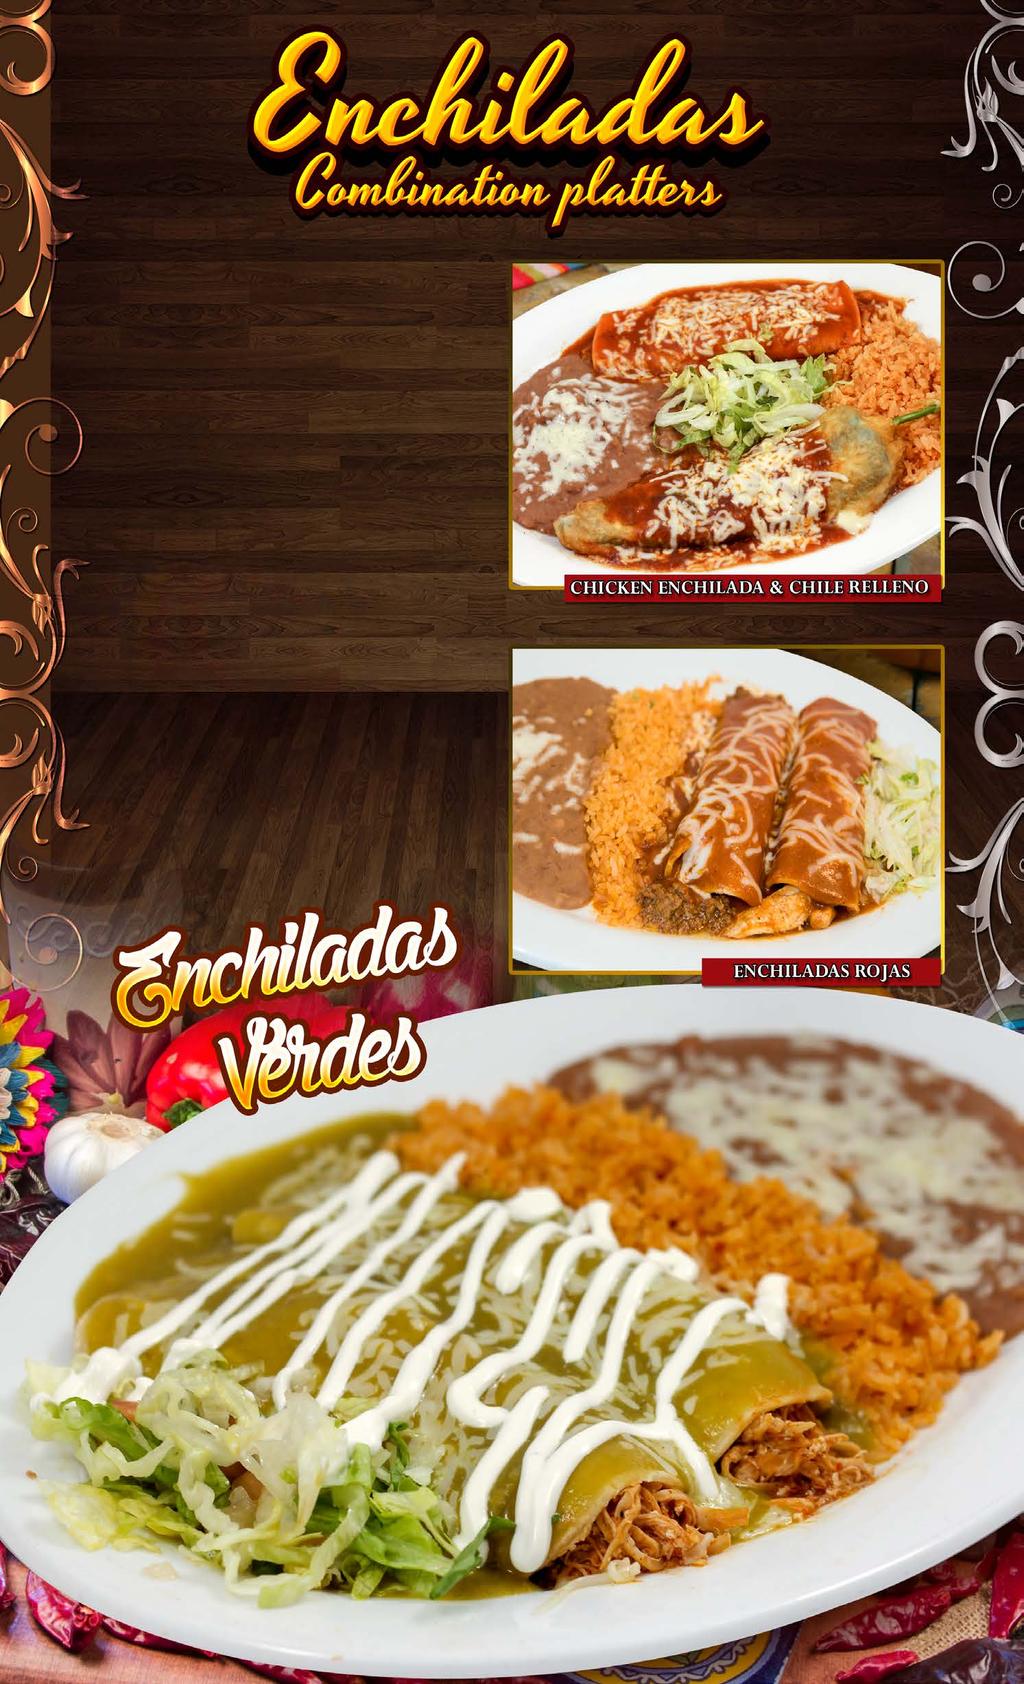 COMBINATIONS Served with rice and beans ONE CHILE RELLENO & ONE CHICKEN ENCHILADA. 13.99 ONE CRISPY BEEF TACO & ONE CHICKEN ENCHILADA. 12.